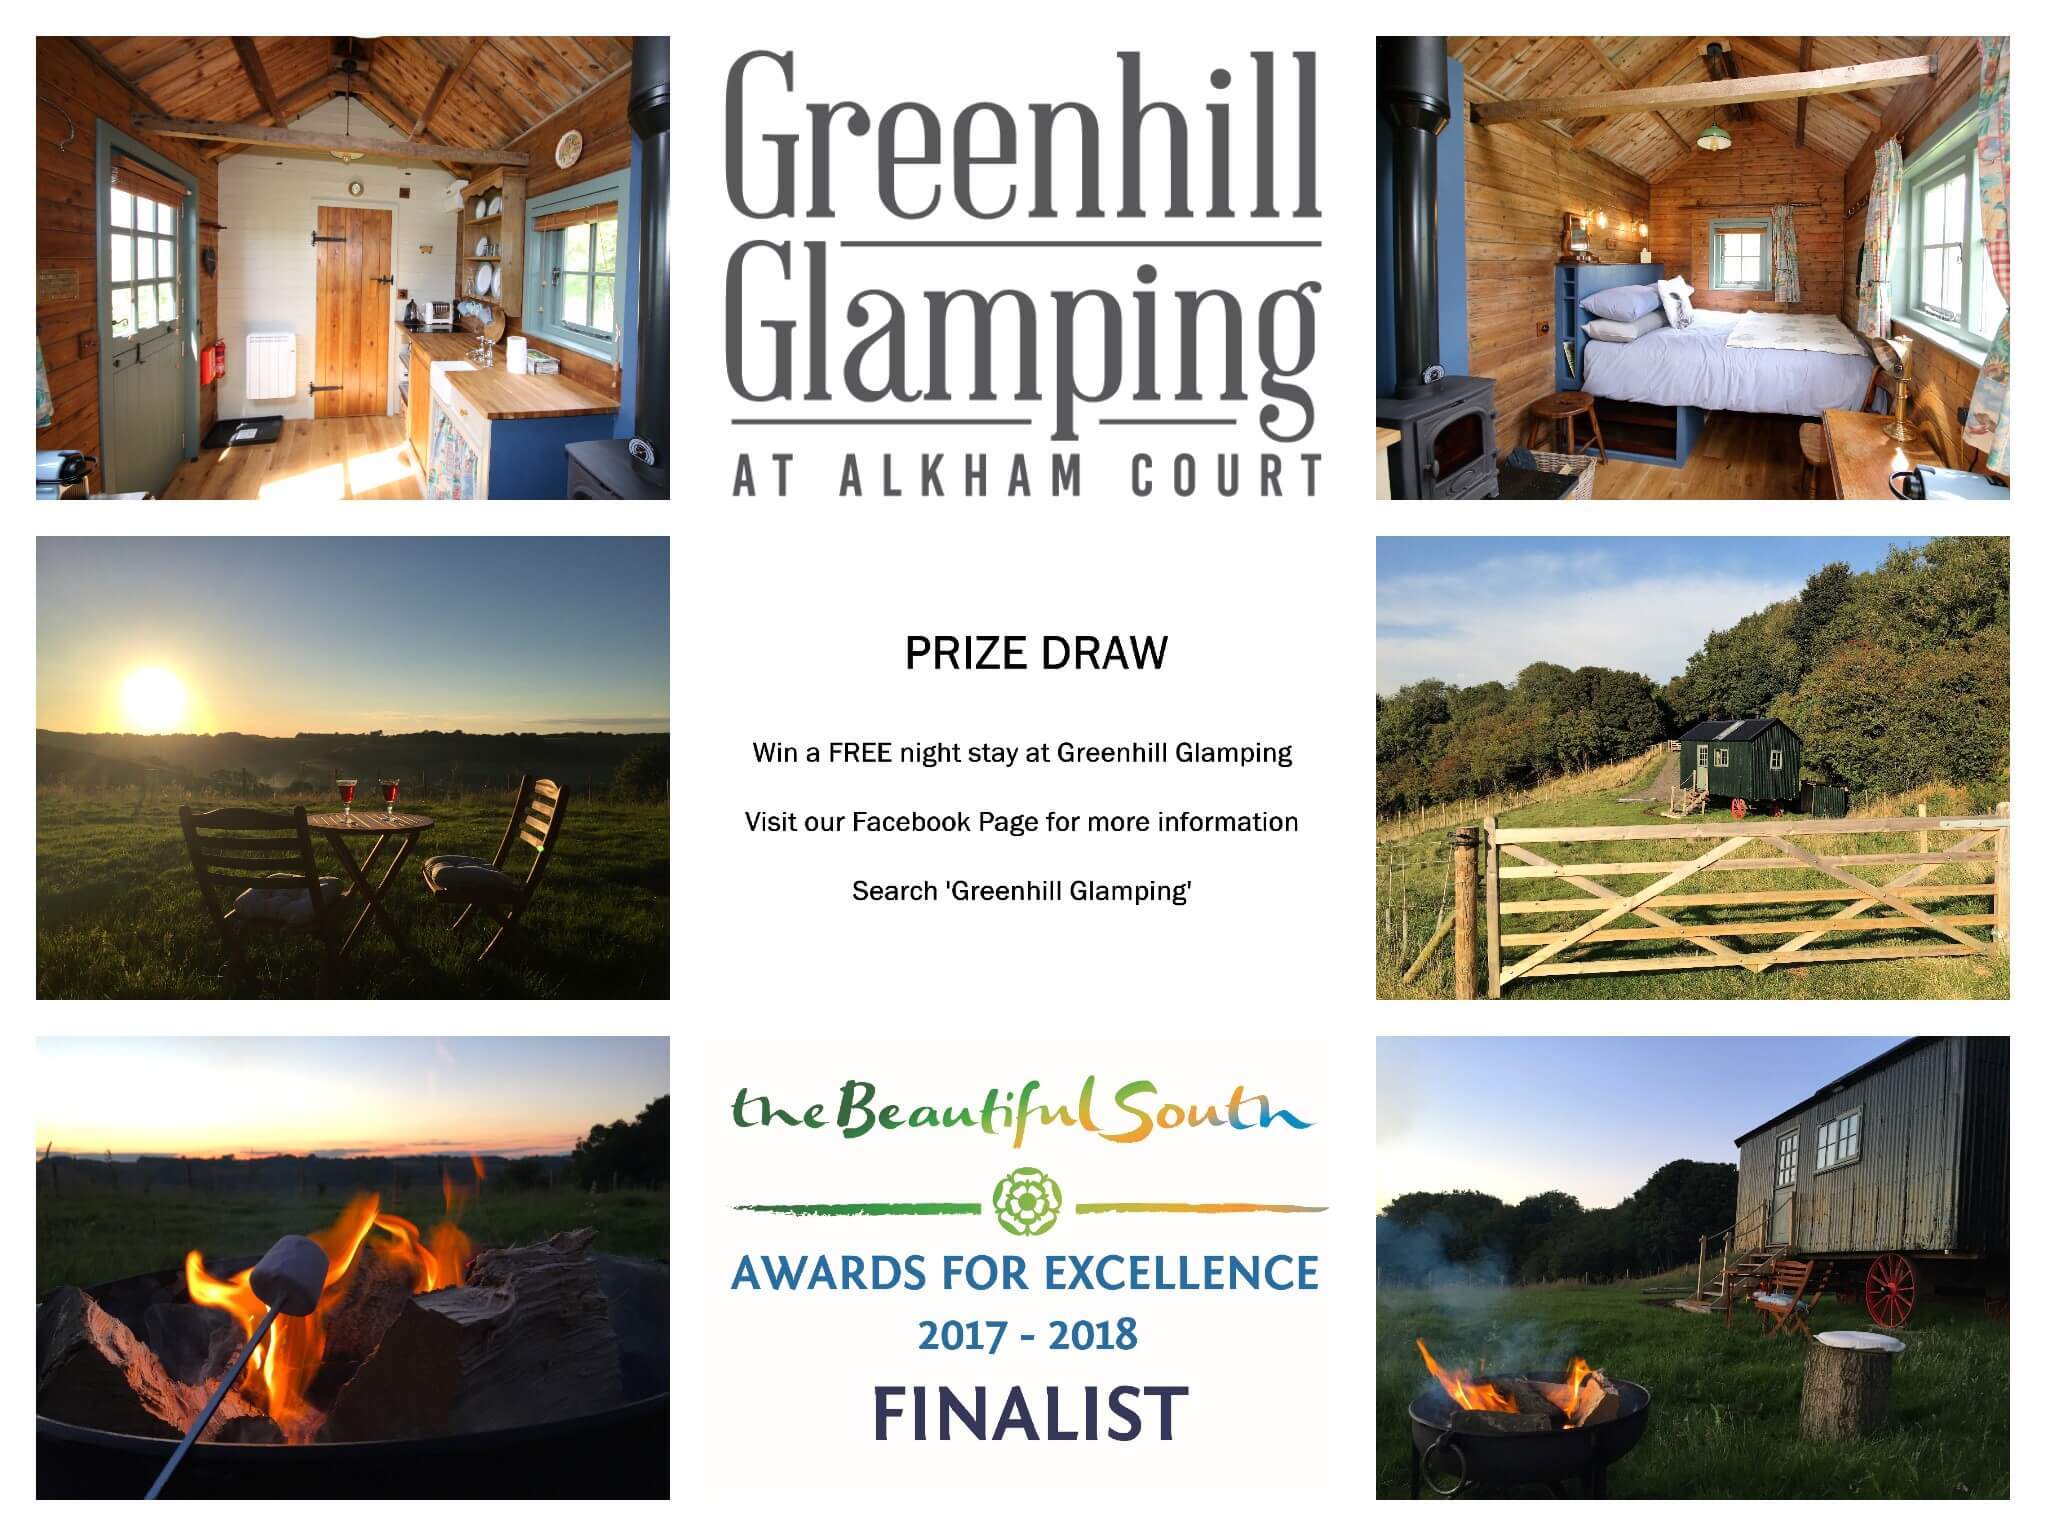 Greenhill Glamping Awards for Excellence Finalist